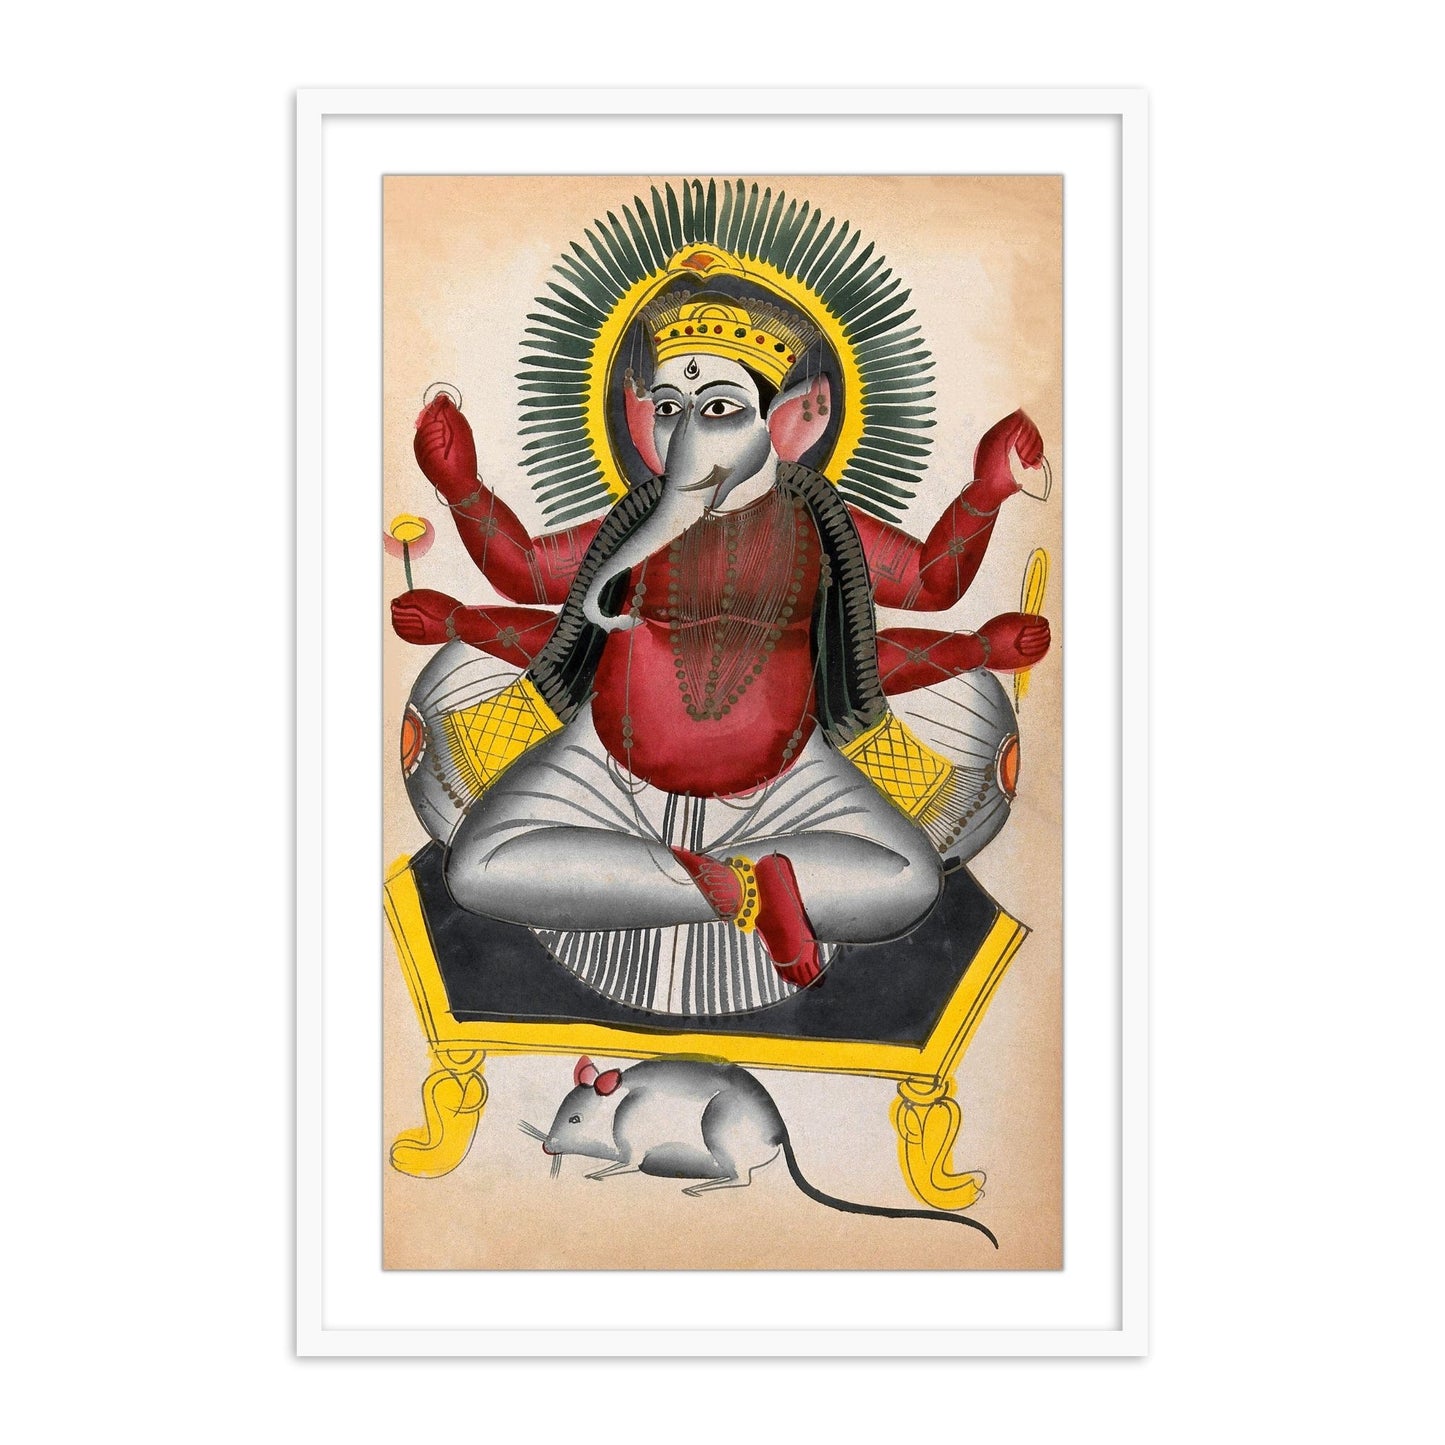 Ganesha Enthroned Holding his Symbols with his Rat Kalighat Painting Framed Wall Art